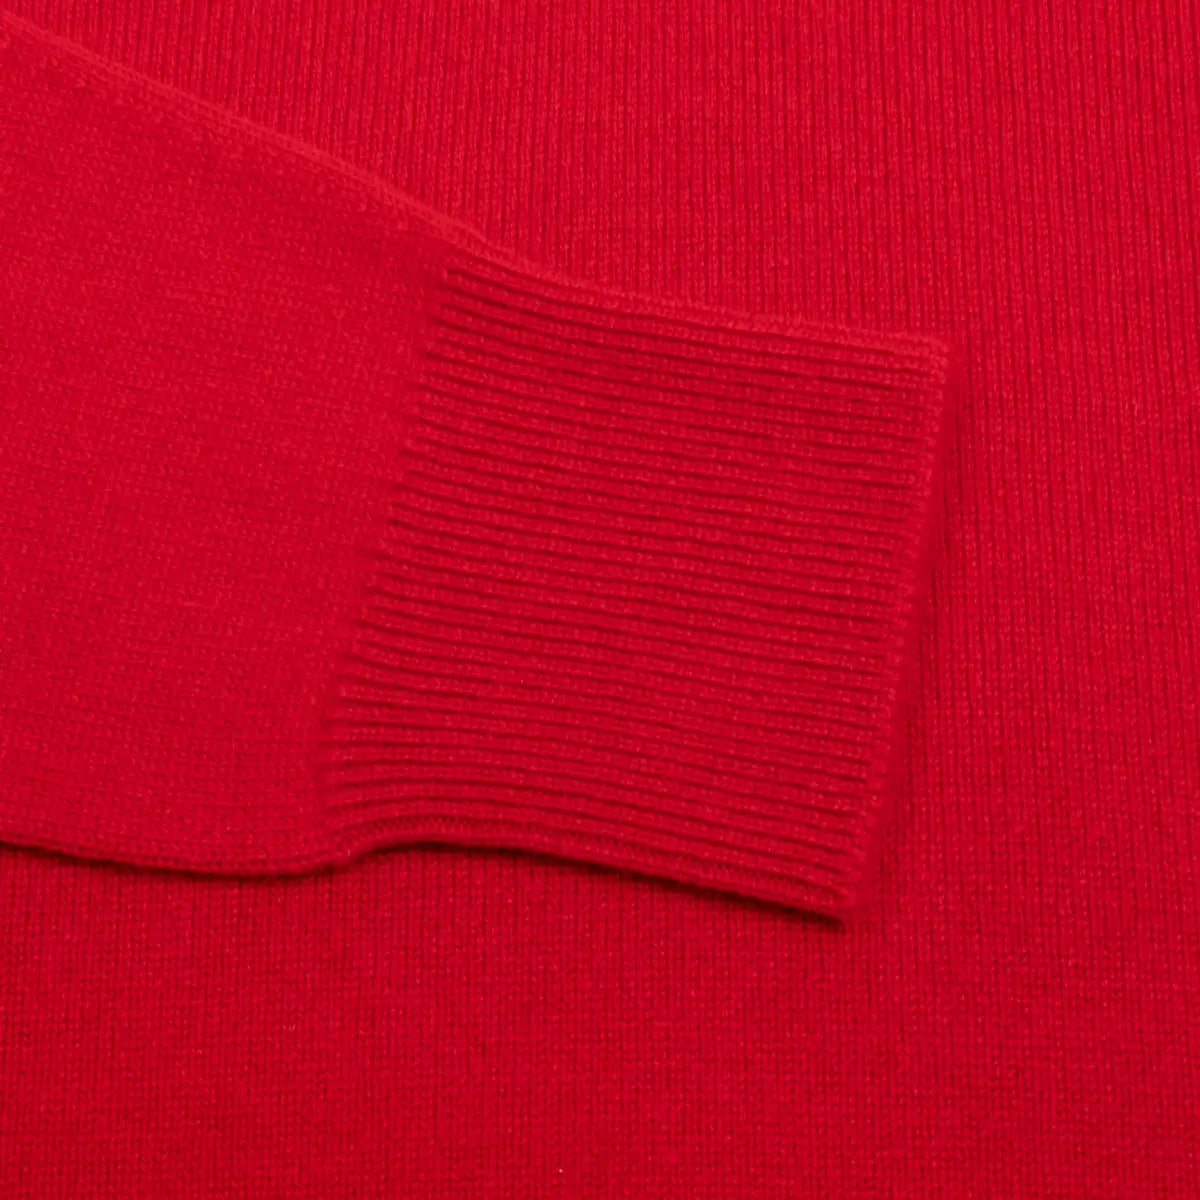 Ruby Red Tobermorey 4ply V-Neck Cashmere Sweater Robert Old